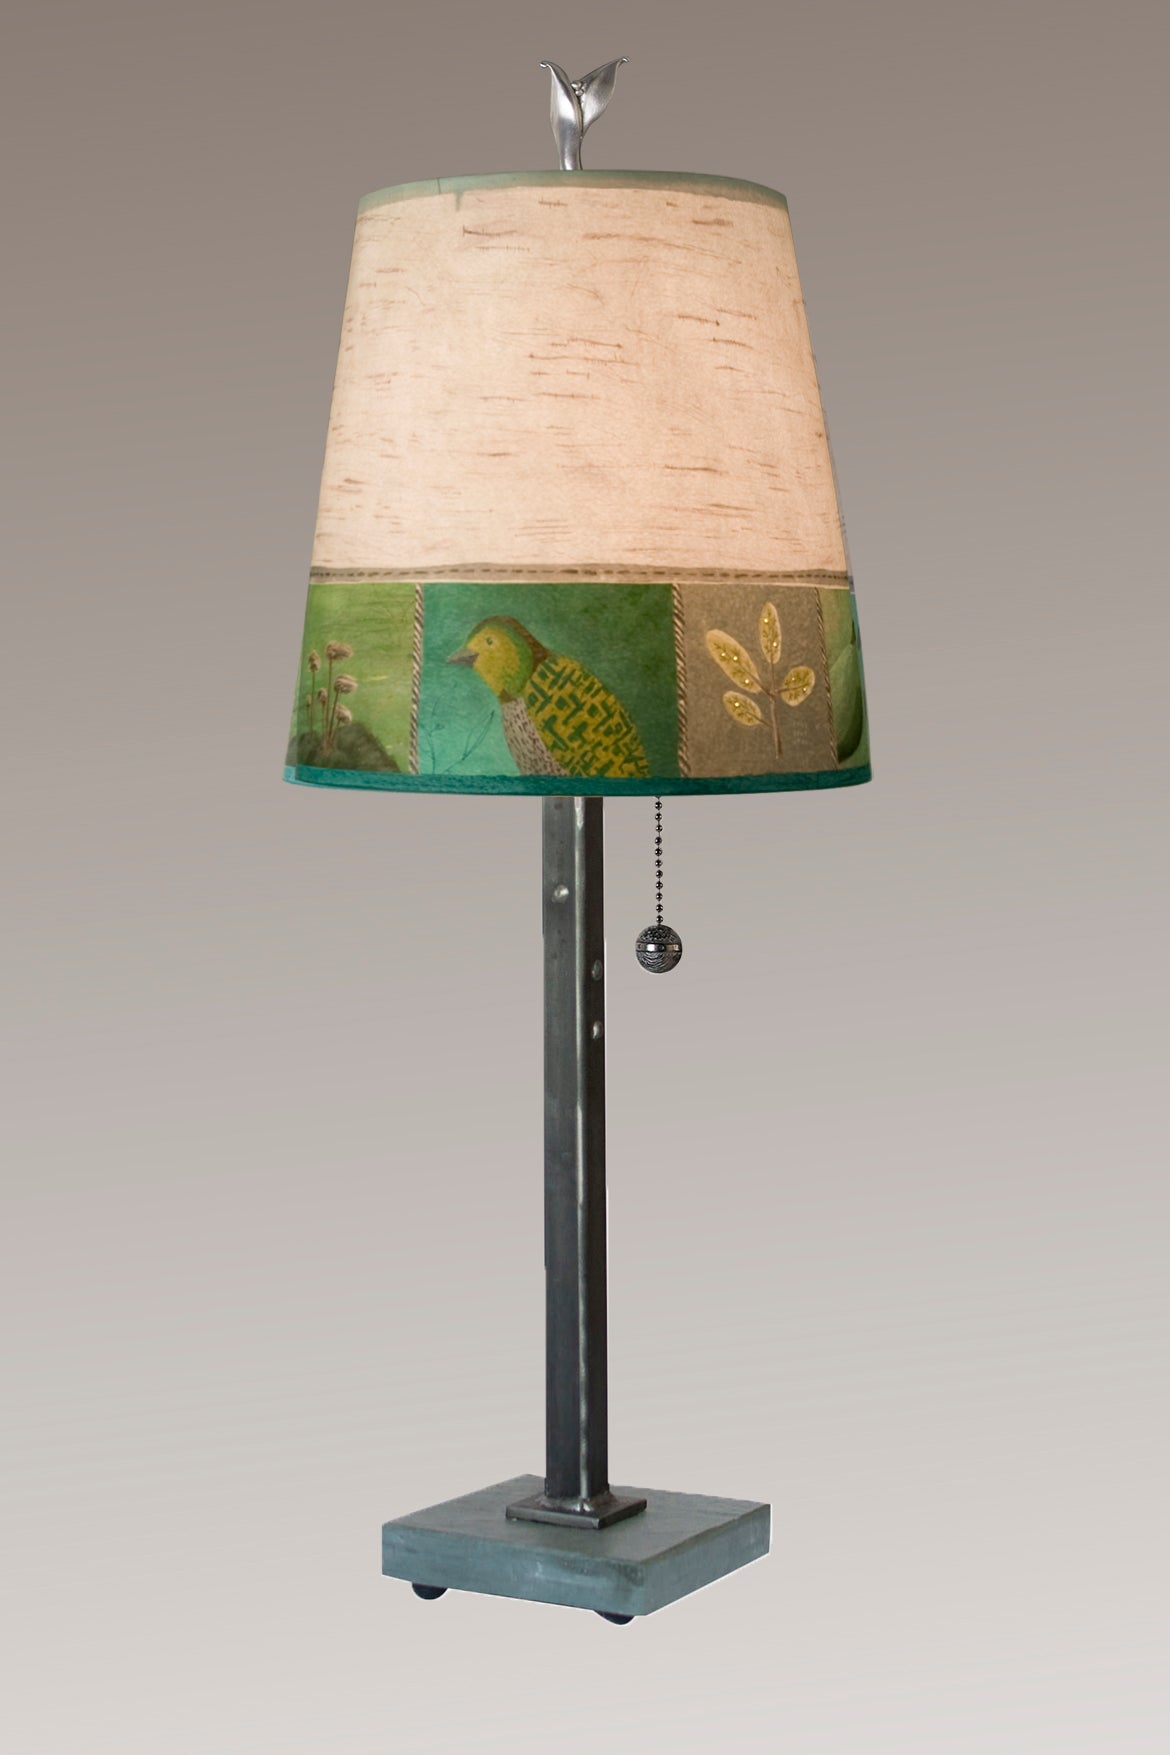 Janna Ugone &amp; Co Table Lamps Steel Table Lamp with Small Drum Shade in Woodland Trails in Birch